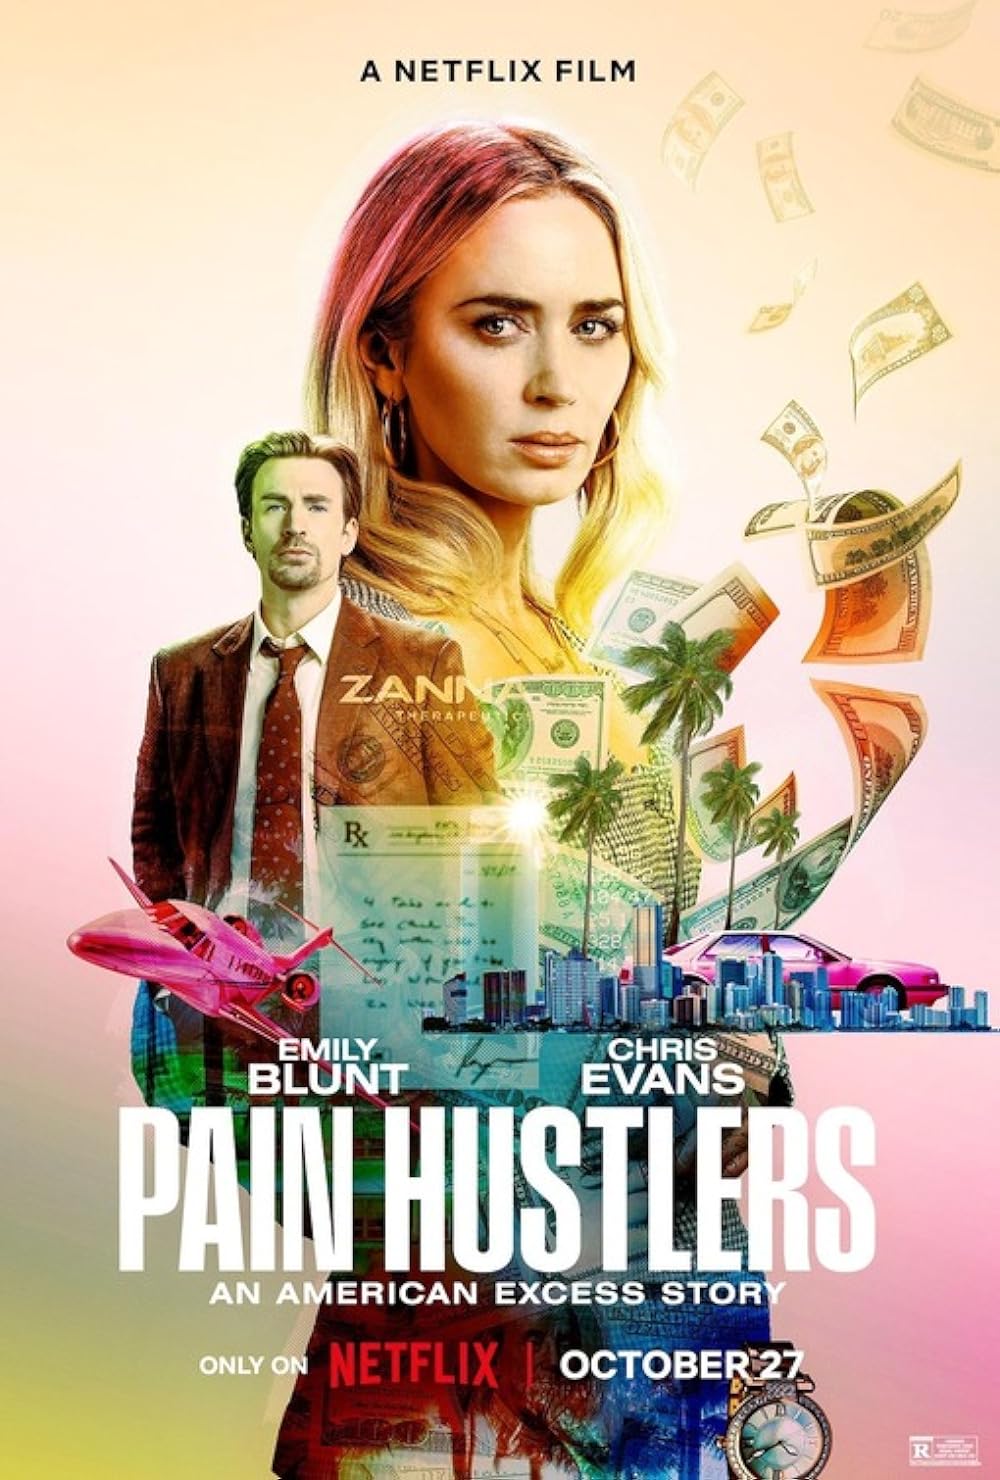 Pain Hustlers (October 27) - Netflix
Based on Evan Hughes's novel and inspired by the Insys controversy, 